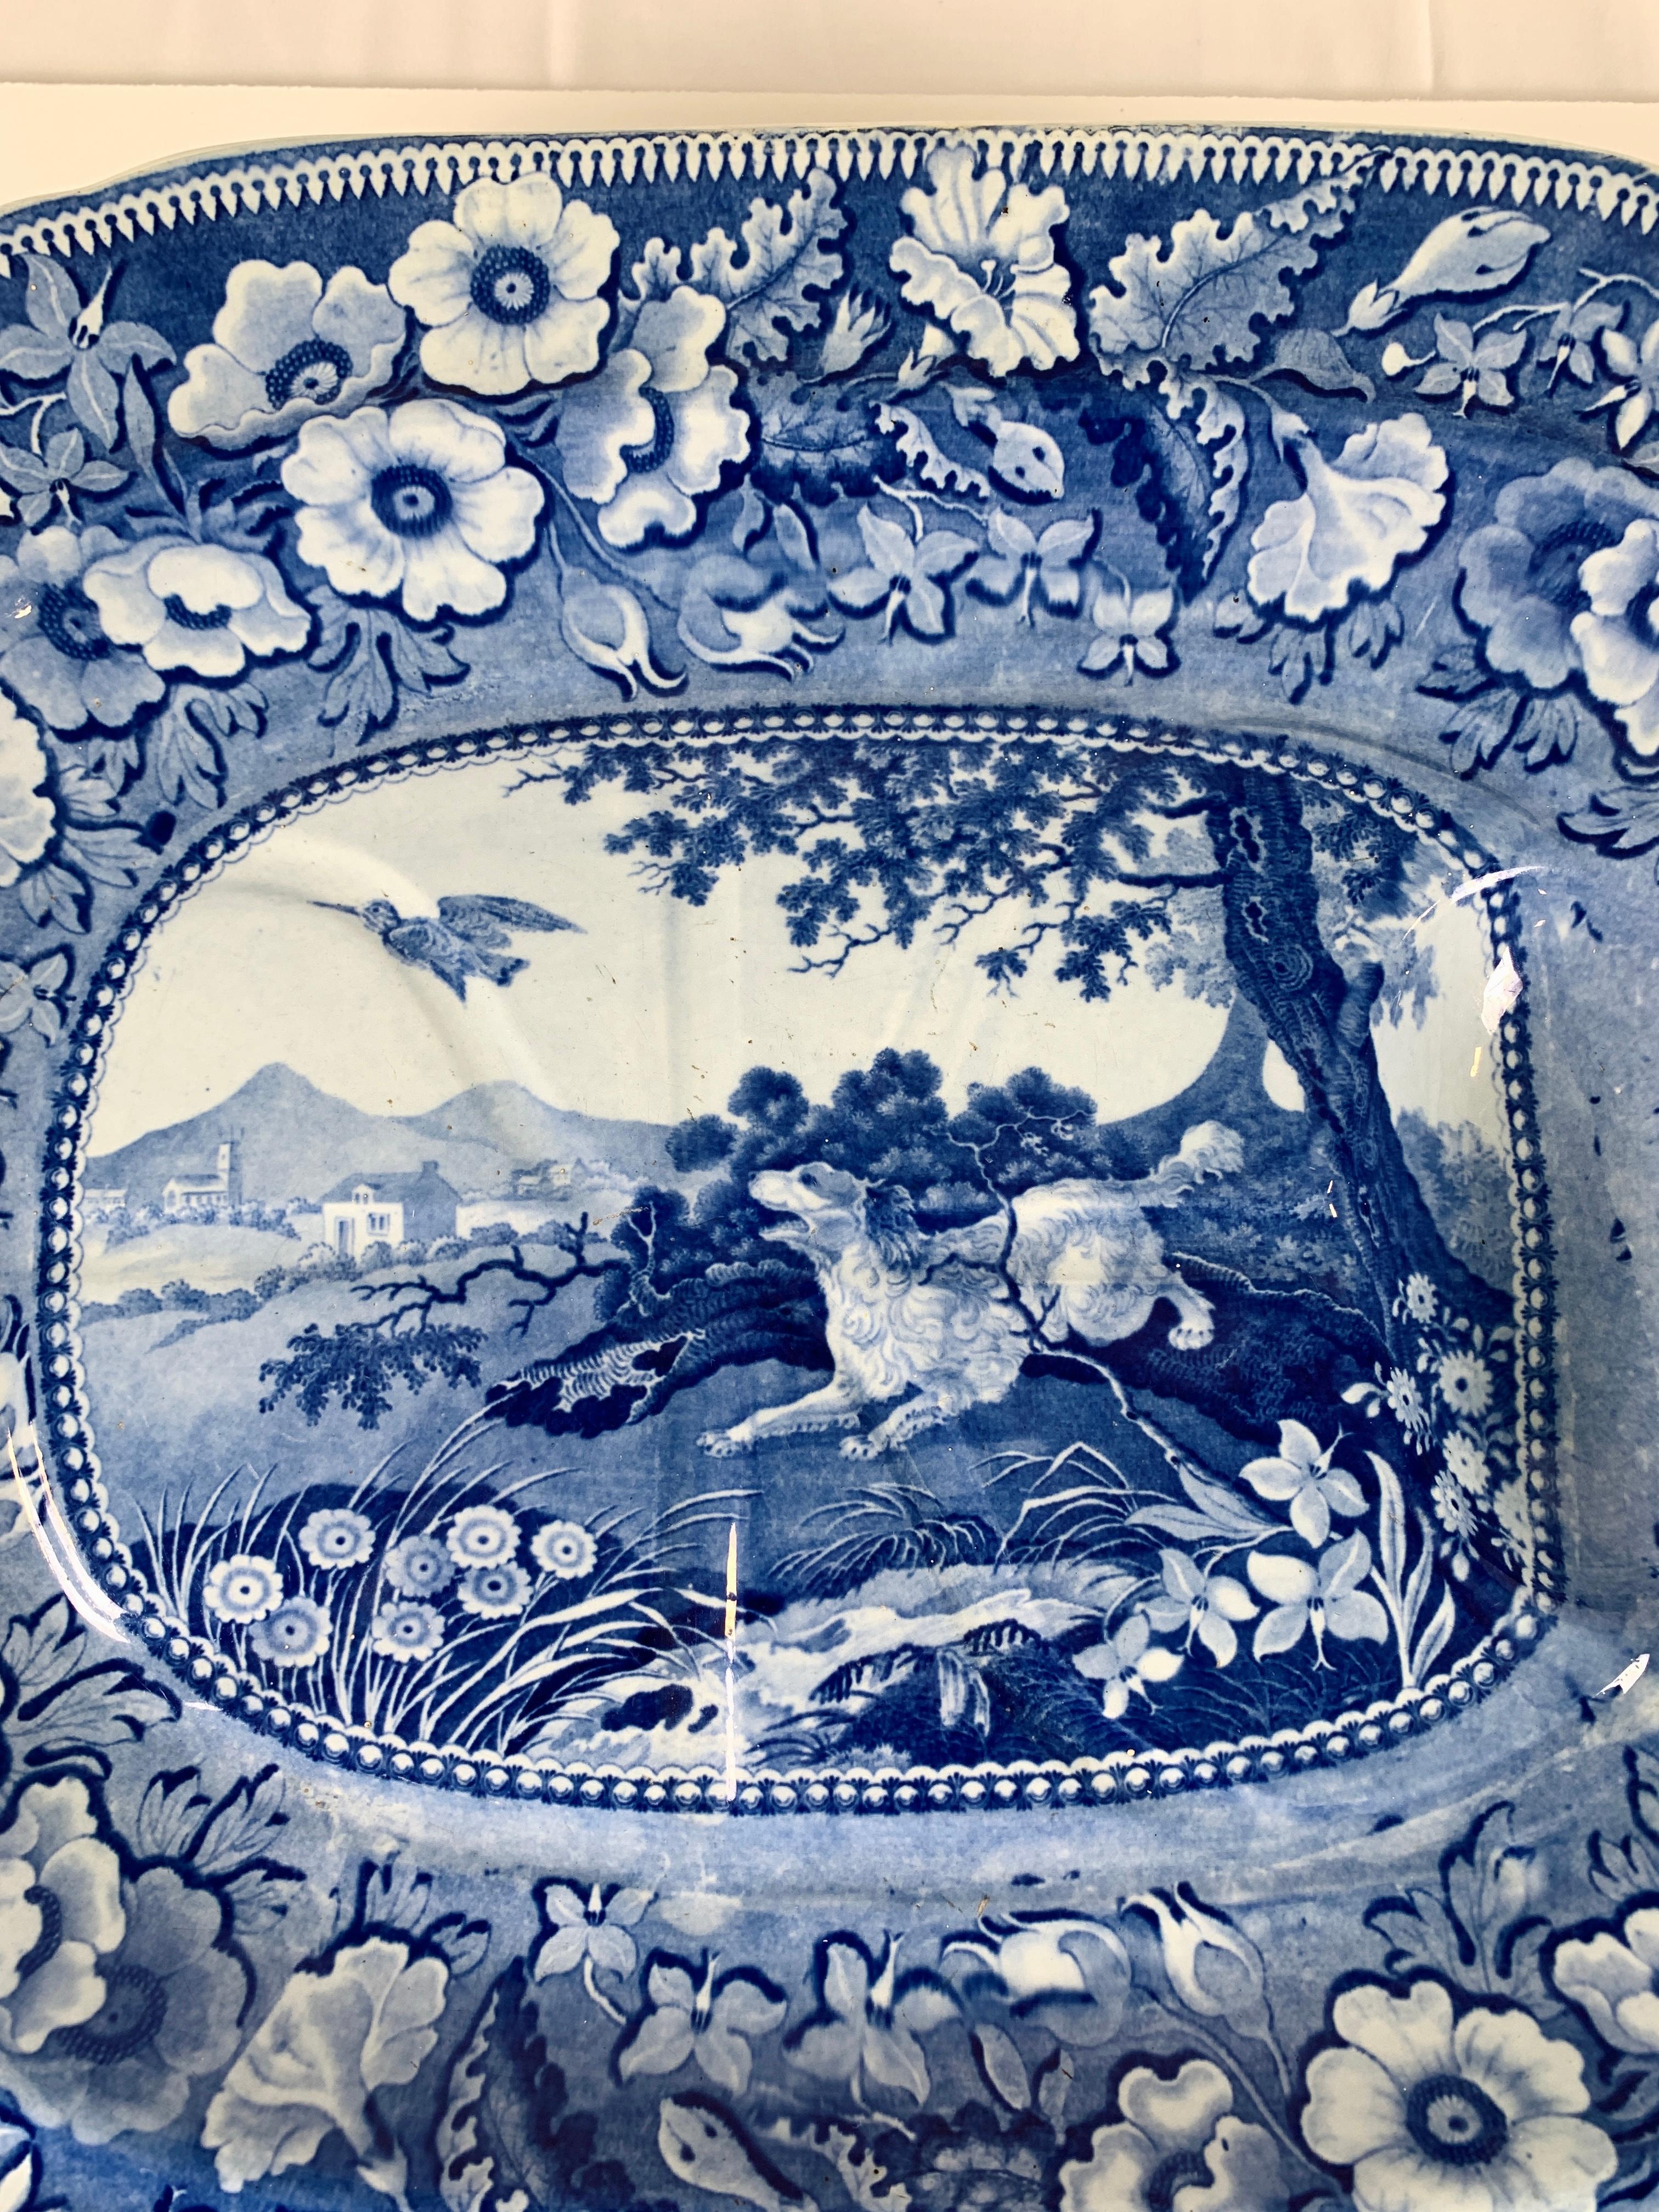 Provenance: The Private Collection of Mario Buatta
Mario loved blue and white, and he loved dogs. On this platter we have both!
Made in Staffordshire circa 1830, the center of the platter shows a hound racing after a bird. Around the lively center